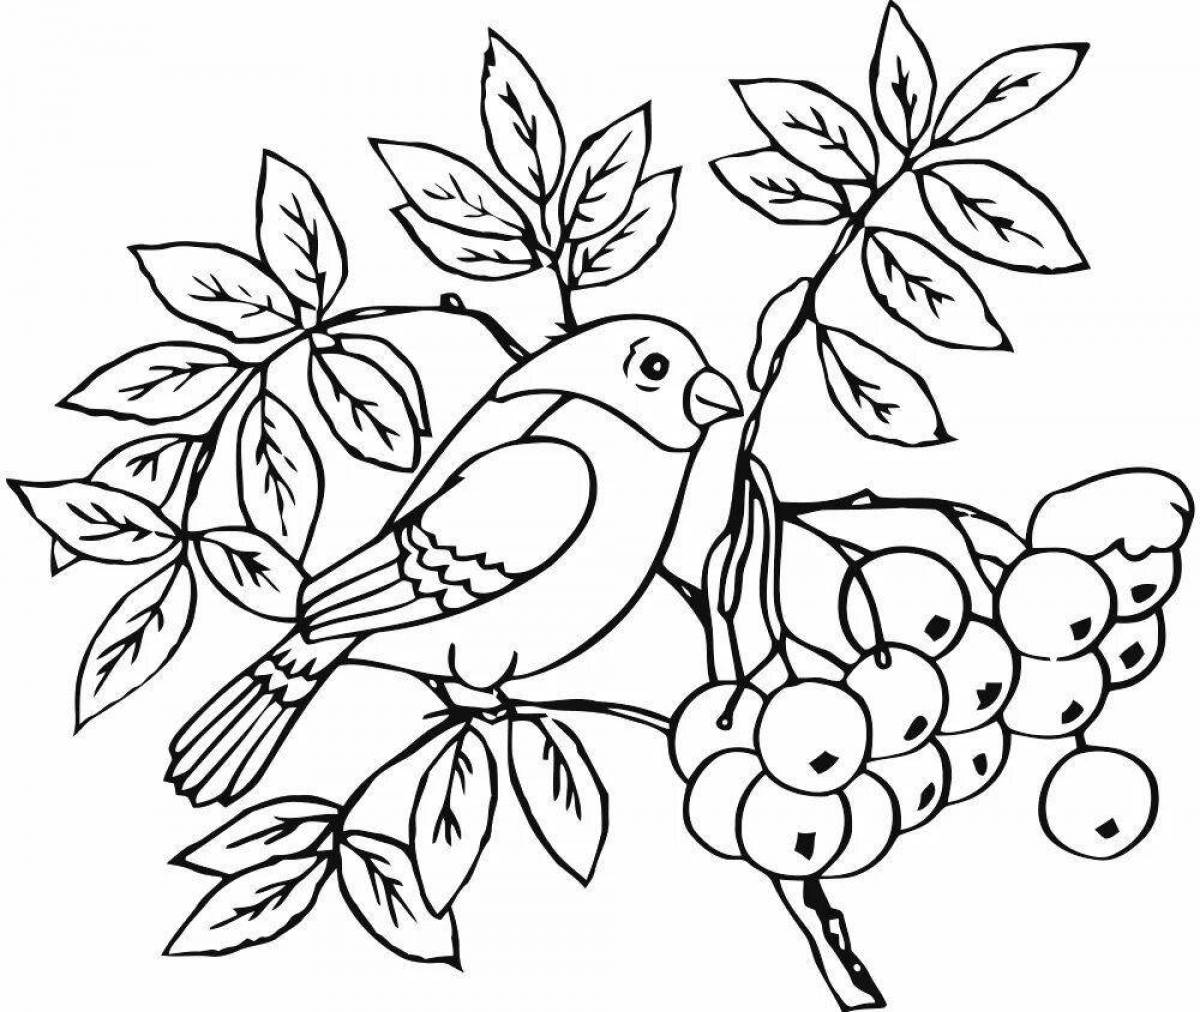 Glowing bullfinch coloring page